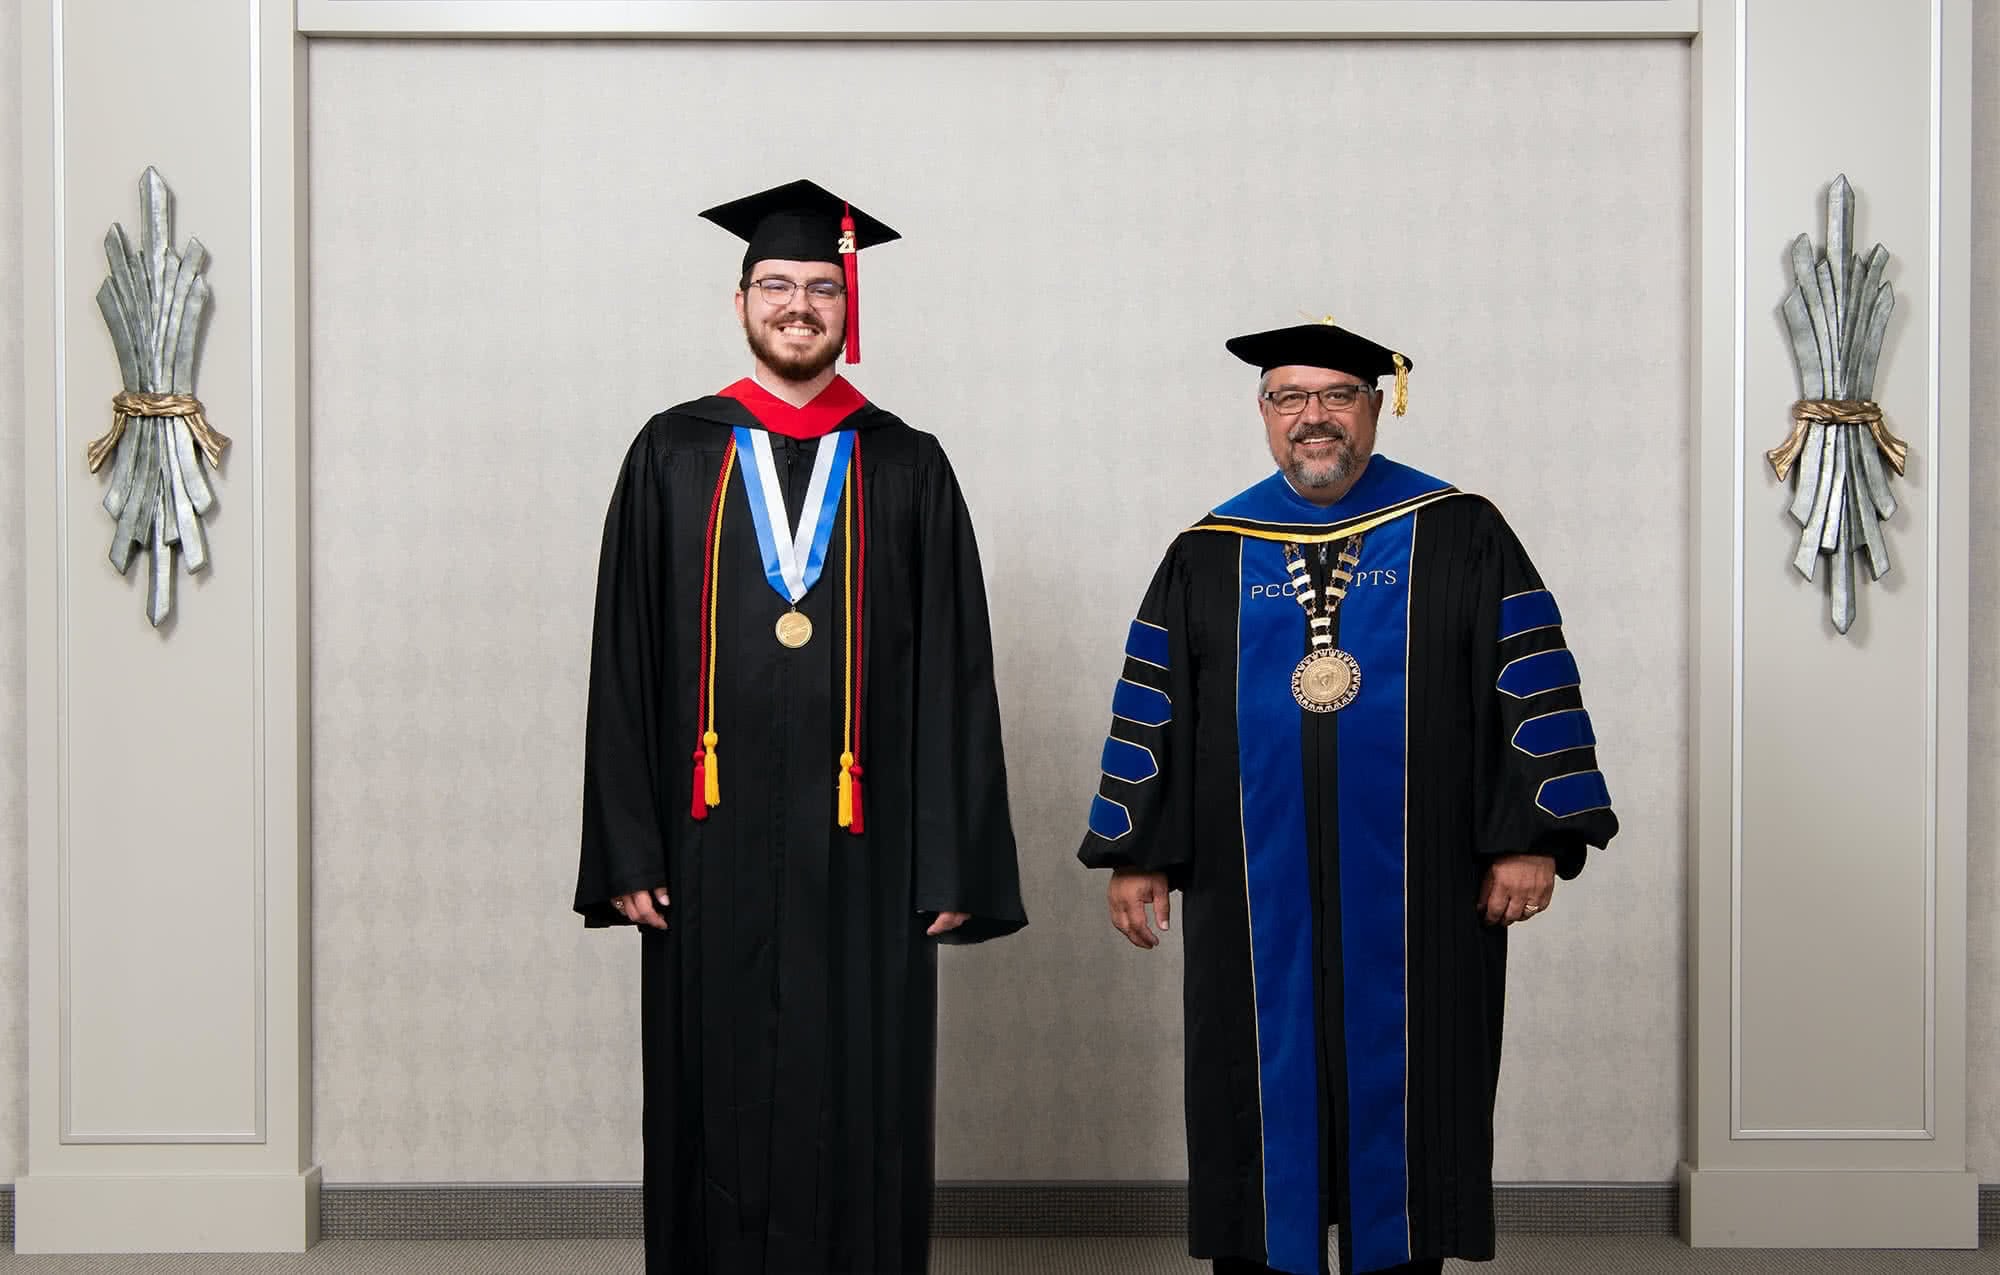 Male graduate poses with Dr. Shoemaker